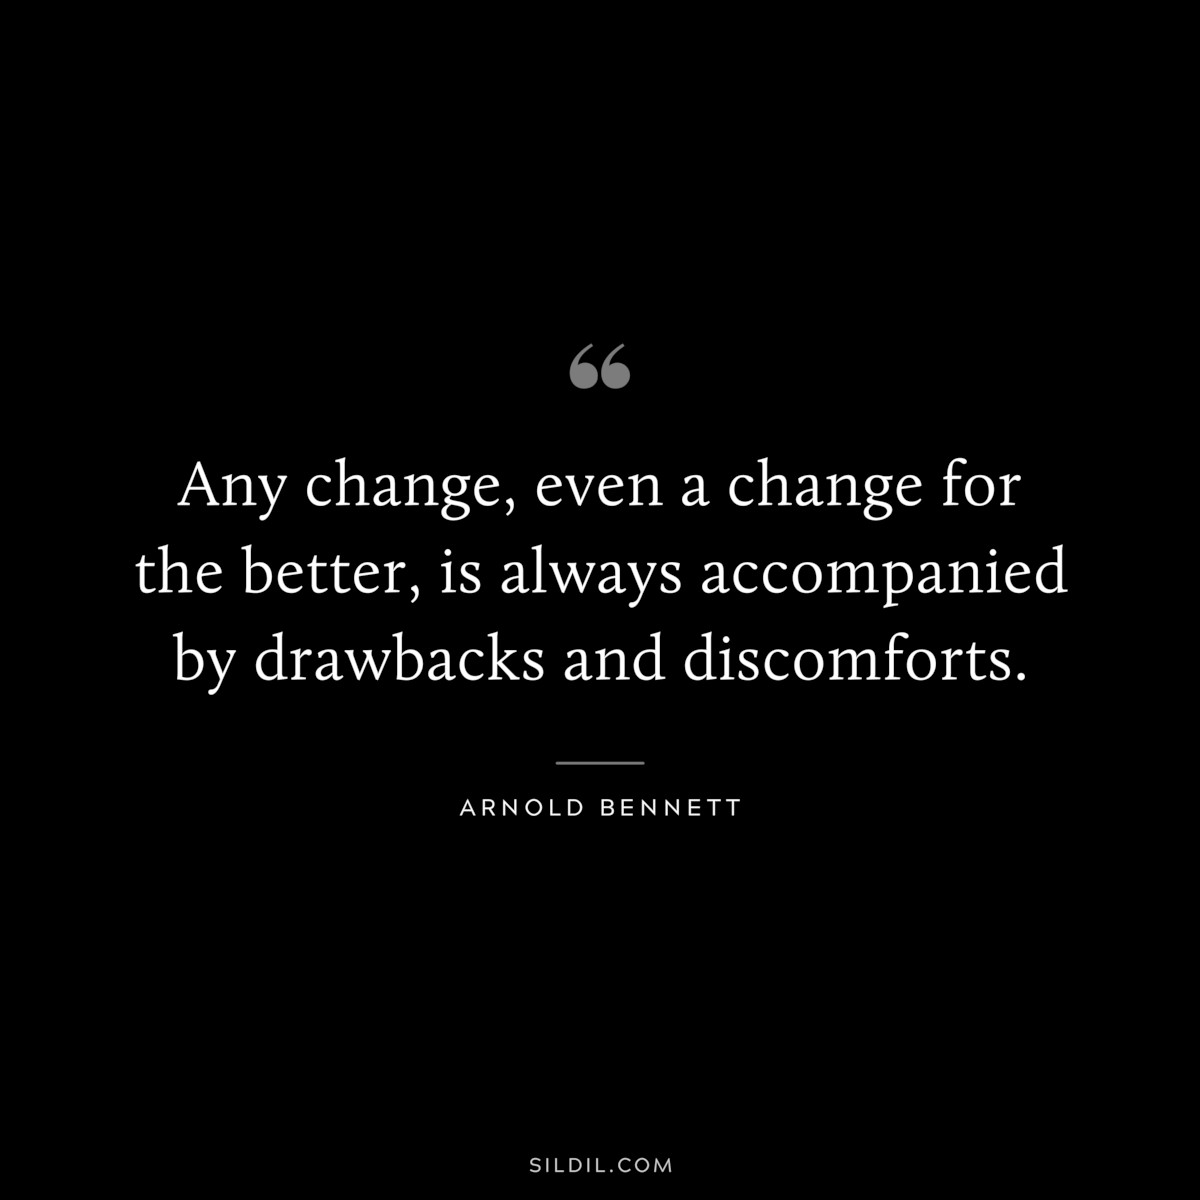 Any change, even a change for the better, is always accompanied by drawbacks and discomforts. ― Arnold Bennett